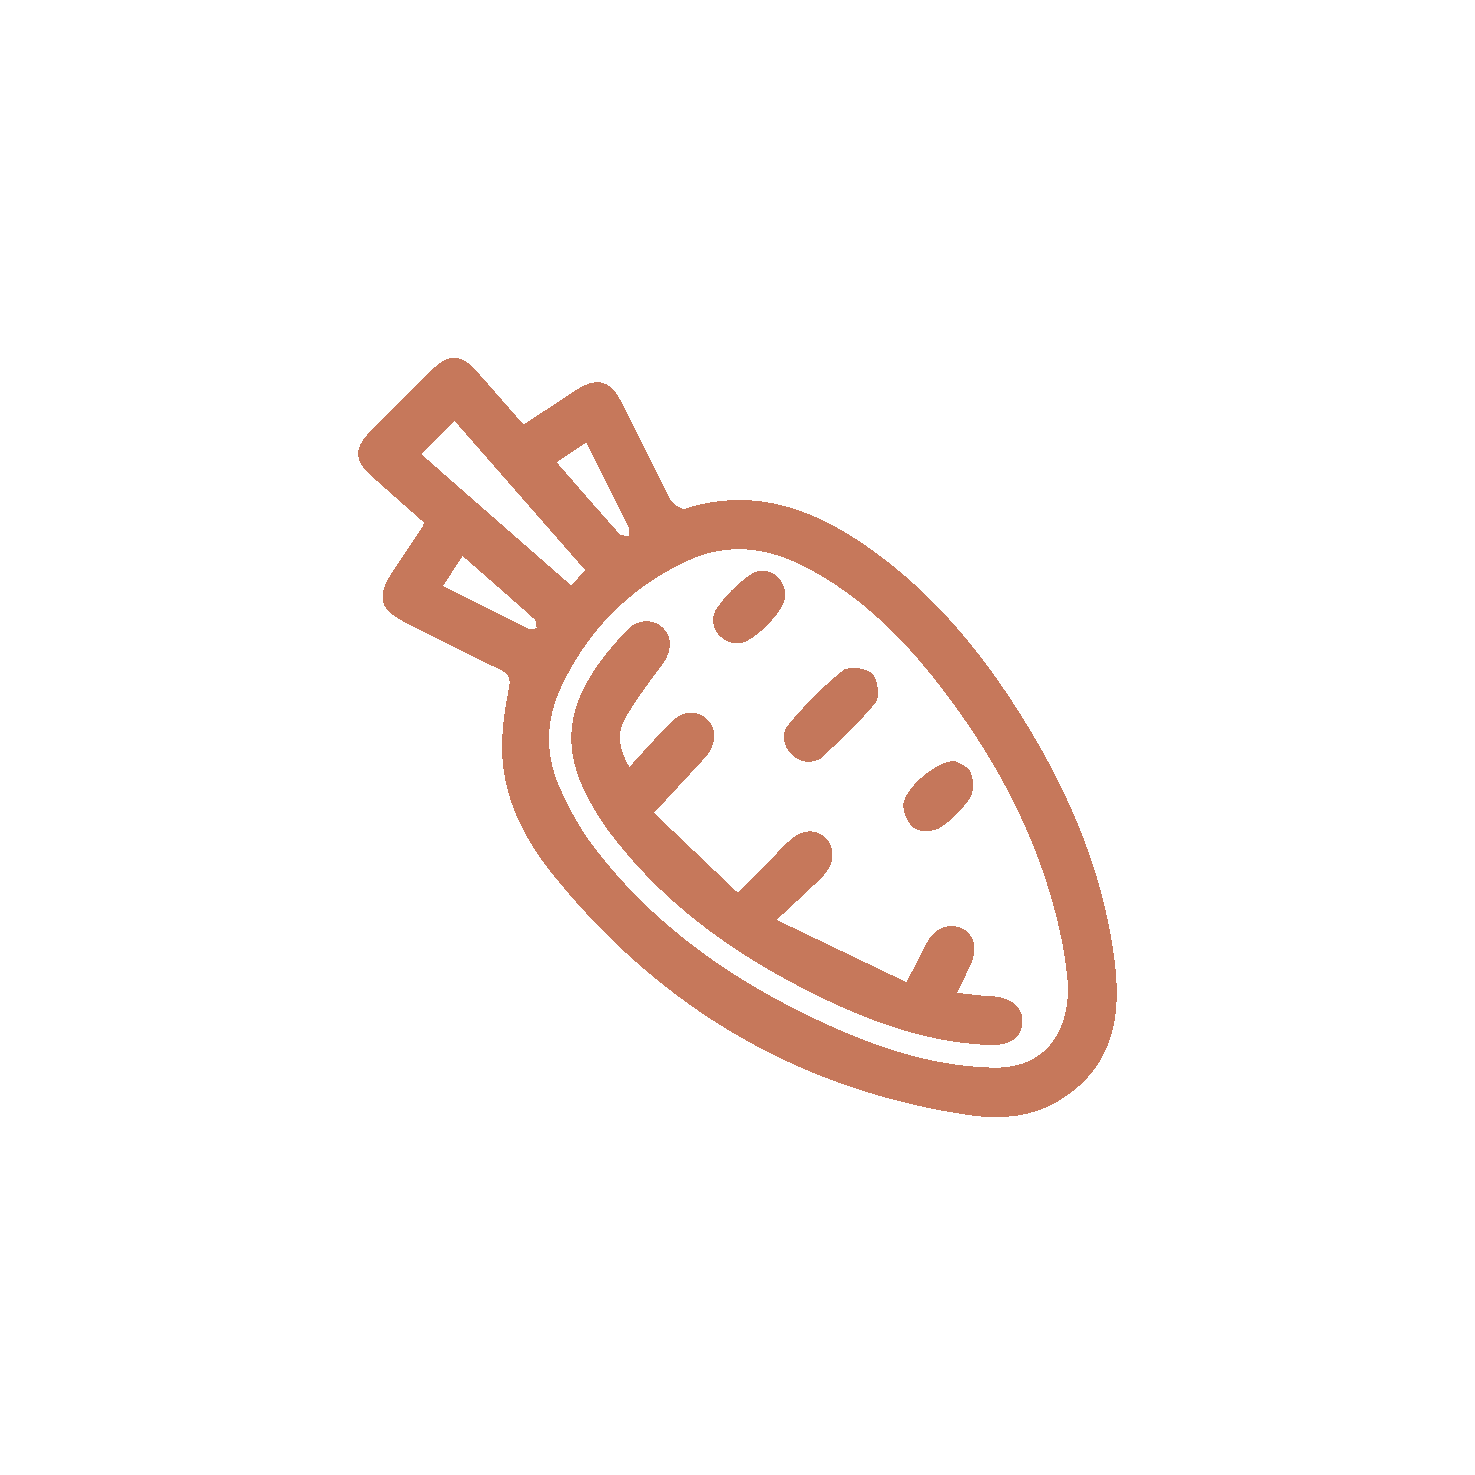 carrot-icon-n-01-01